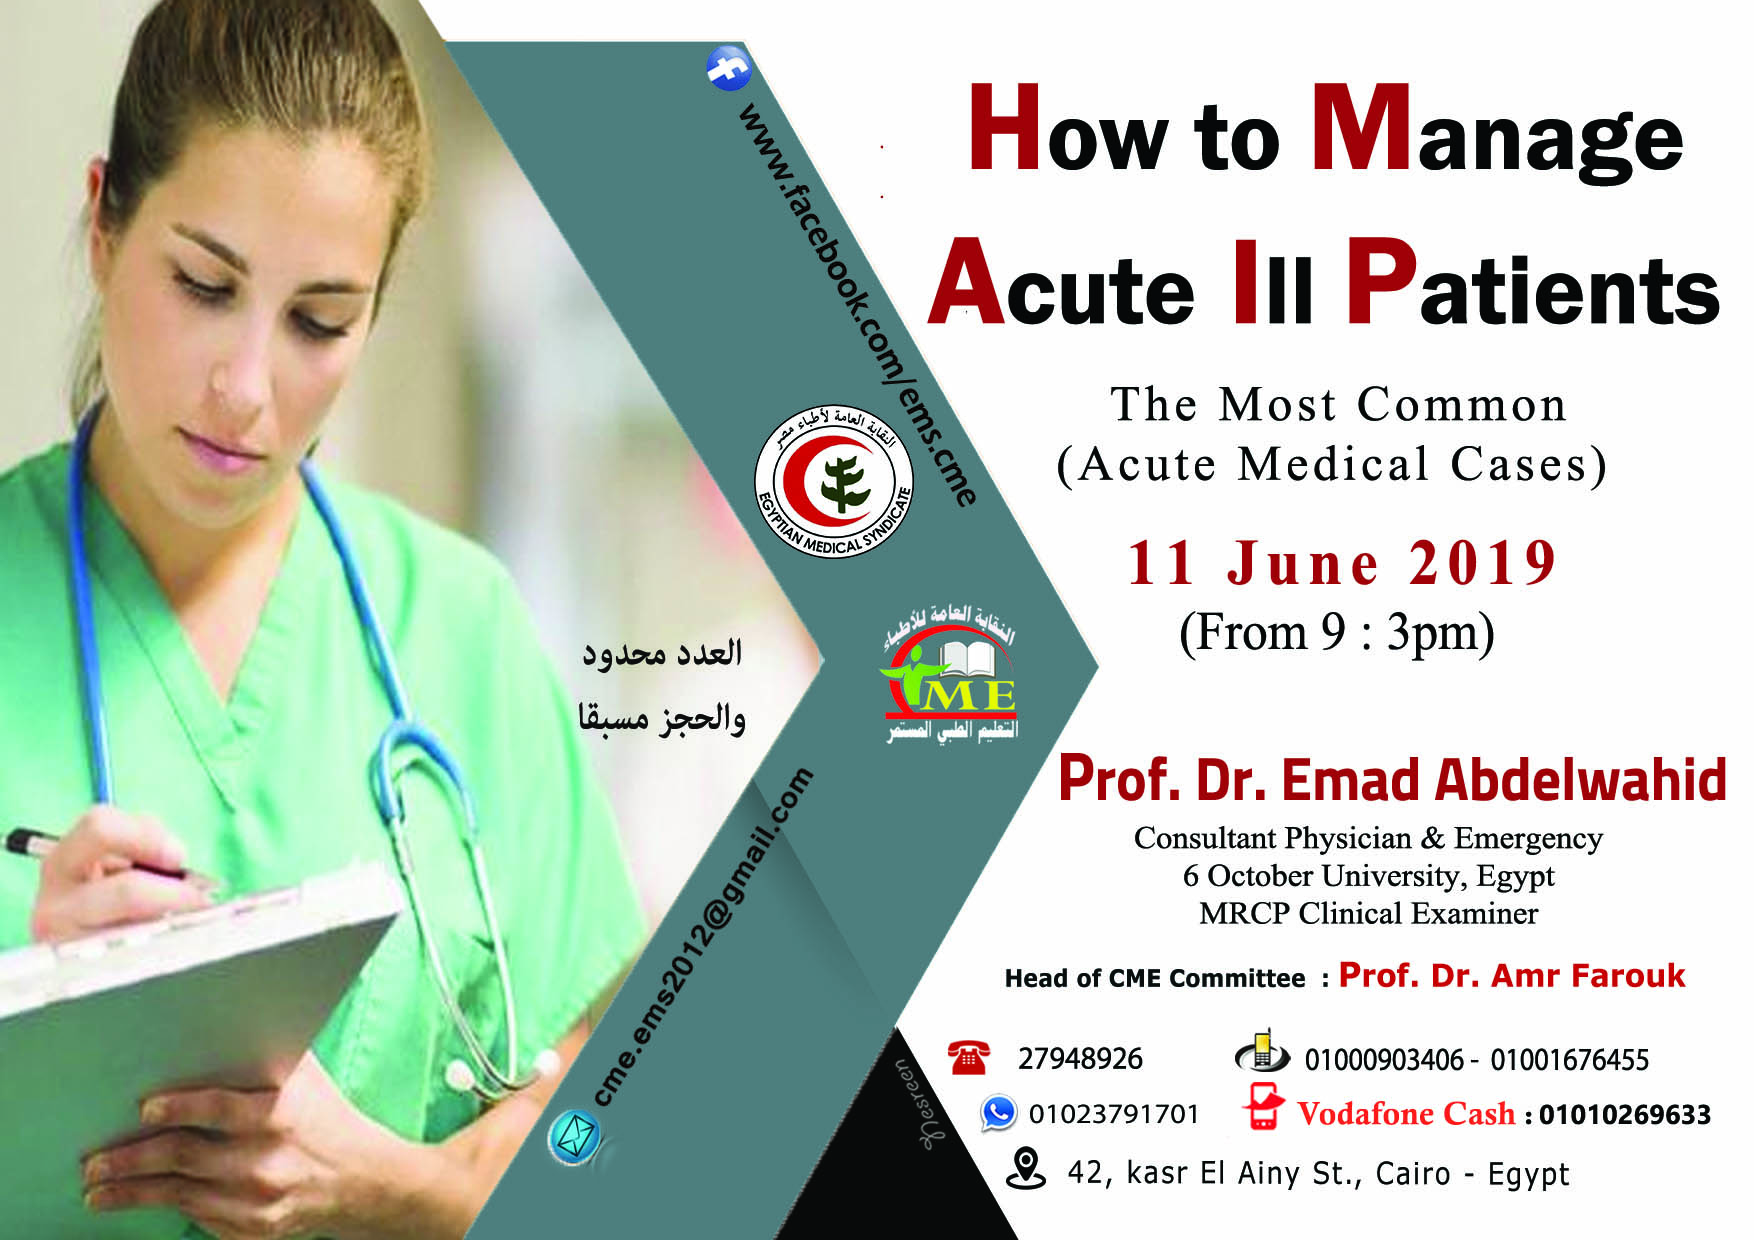 How to Manage Acute Ill Patients